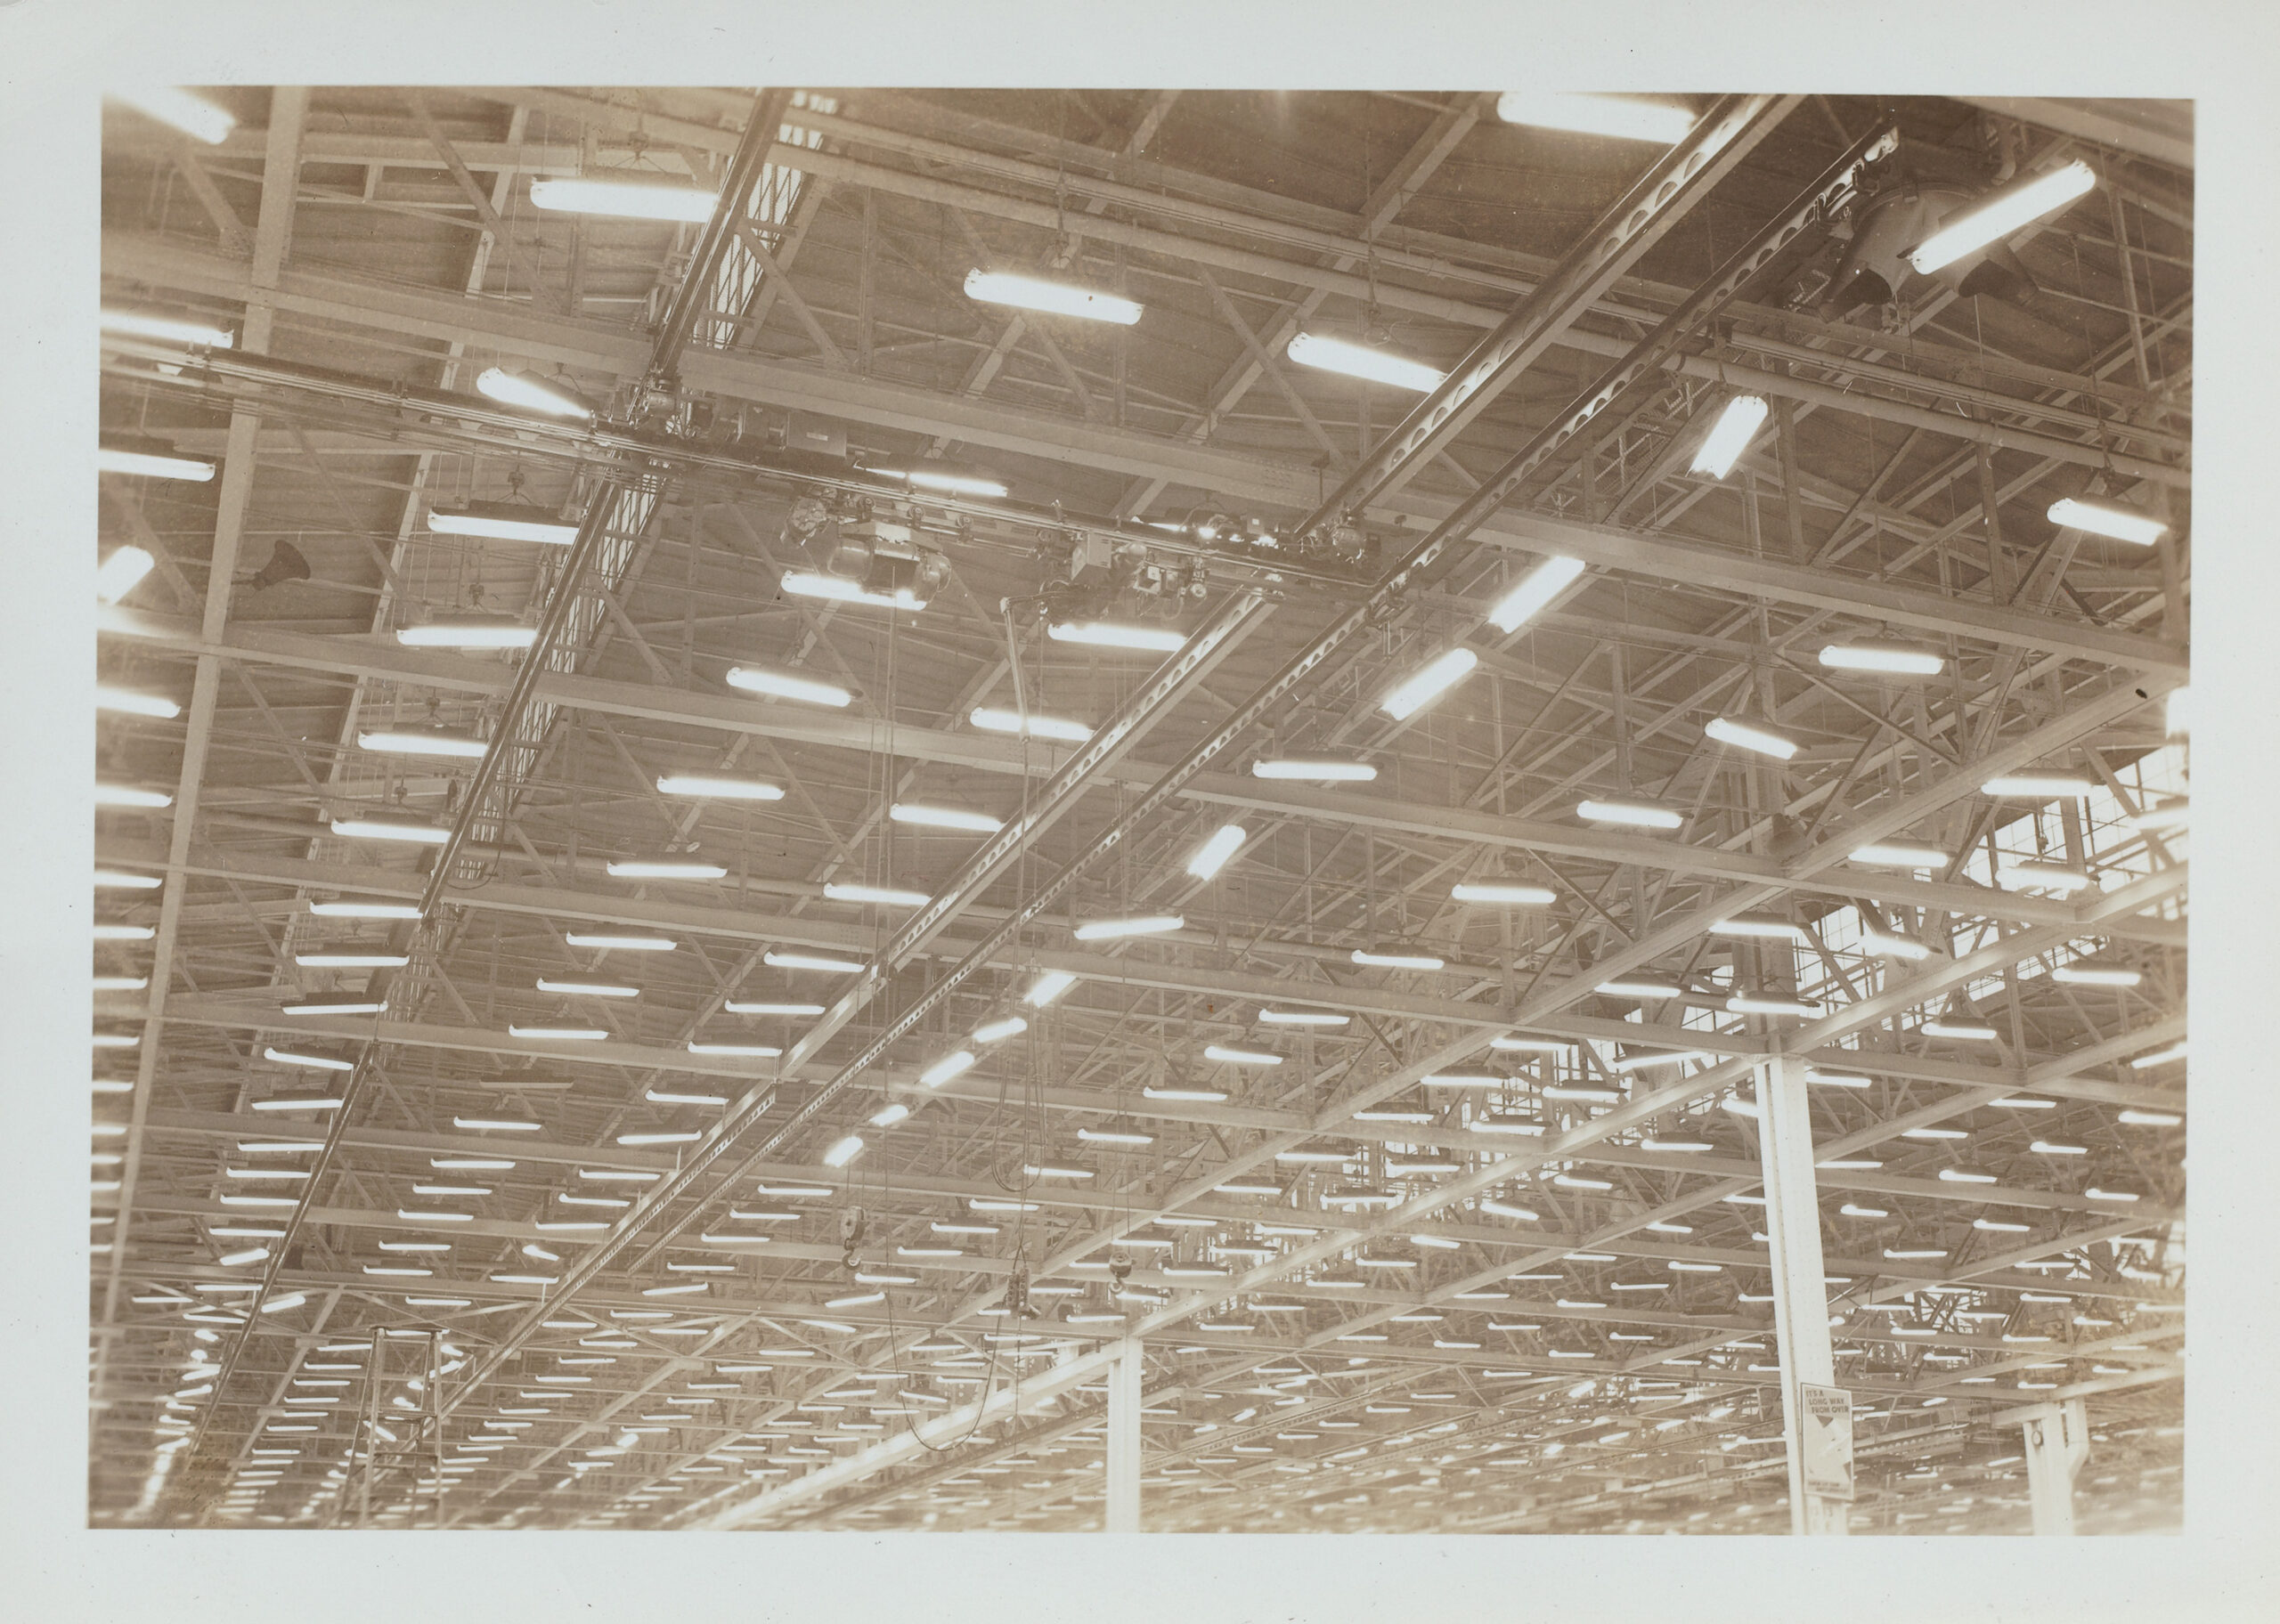 Black and white photograph of rows of light fixtures on the ceiling of an aircraft factory.